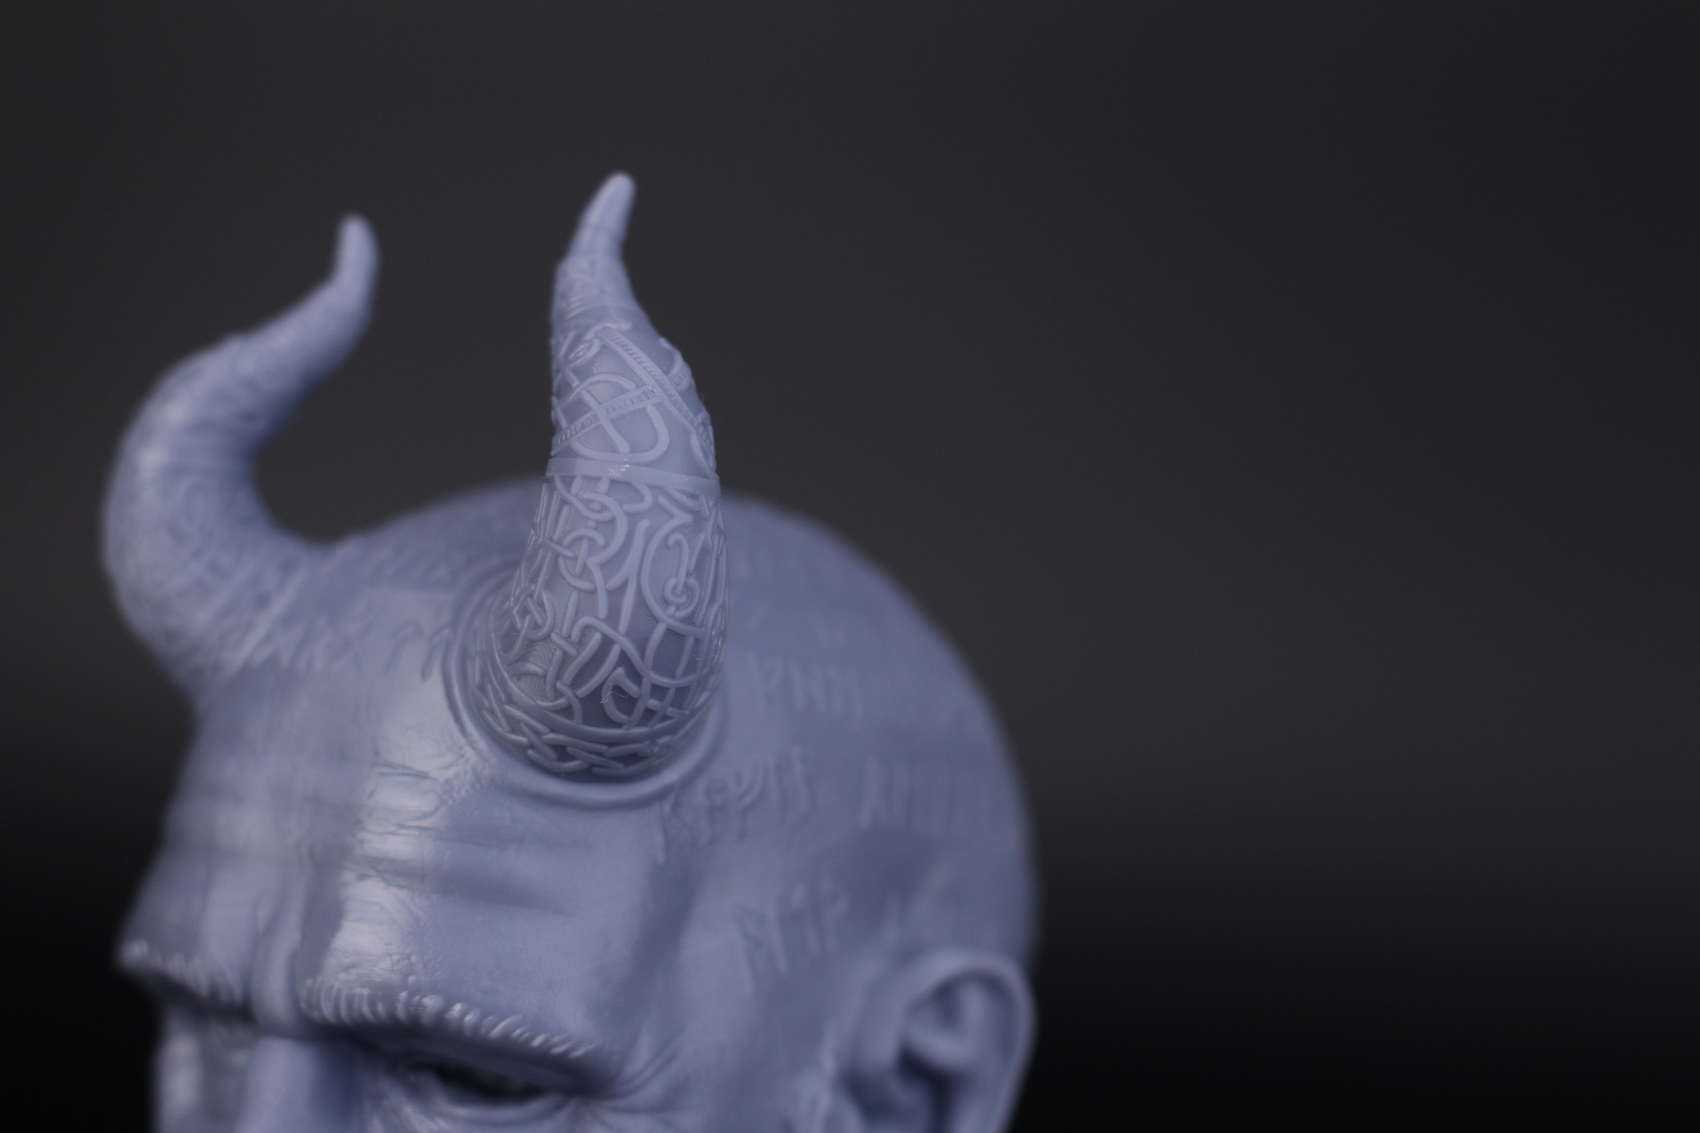 Mimir Bust from Fotis Mint printed on Anycubic Photon M36 | Anycubic Photon M3 Review: Bridging the gap